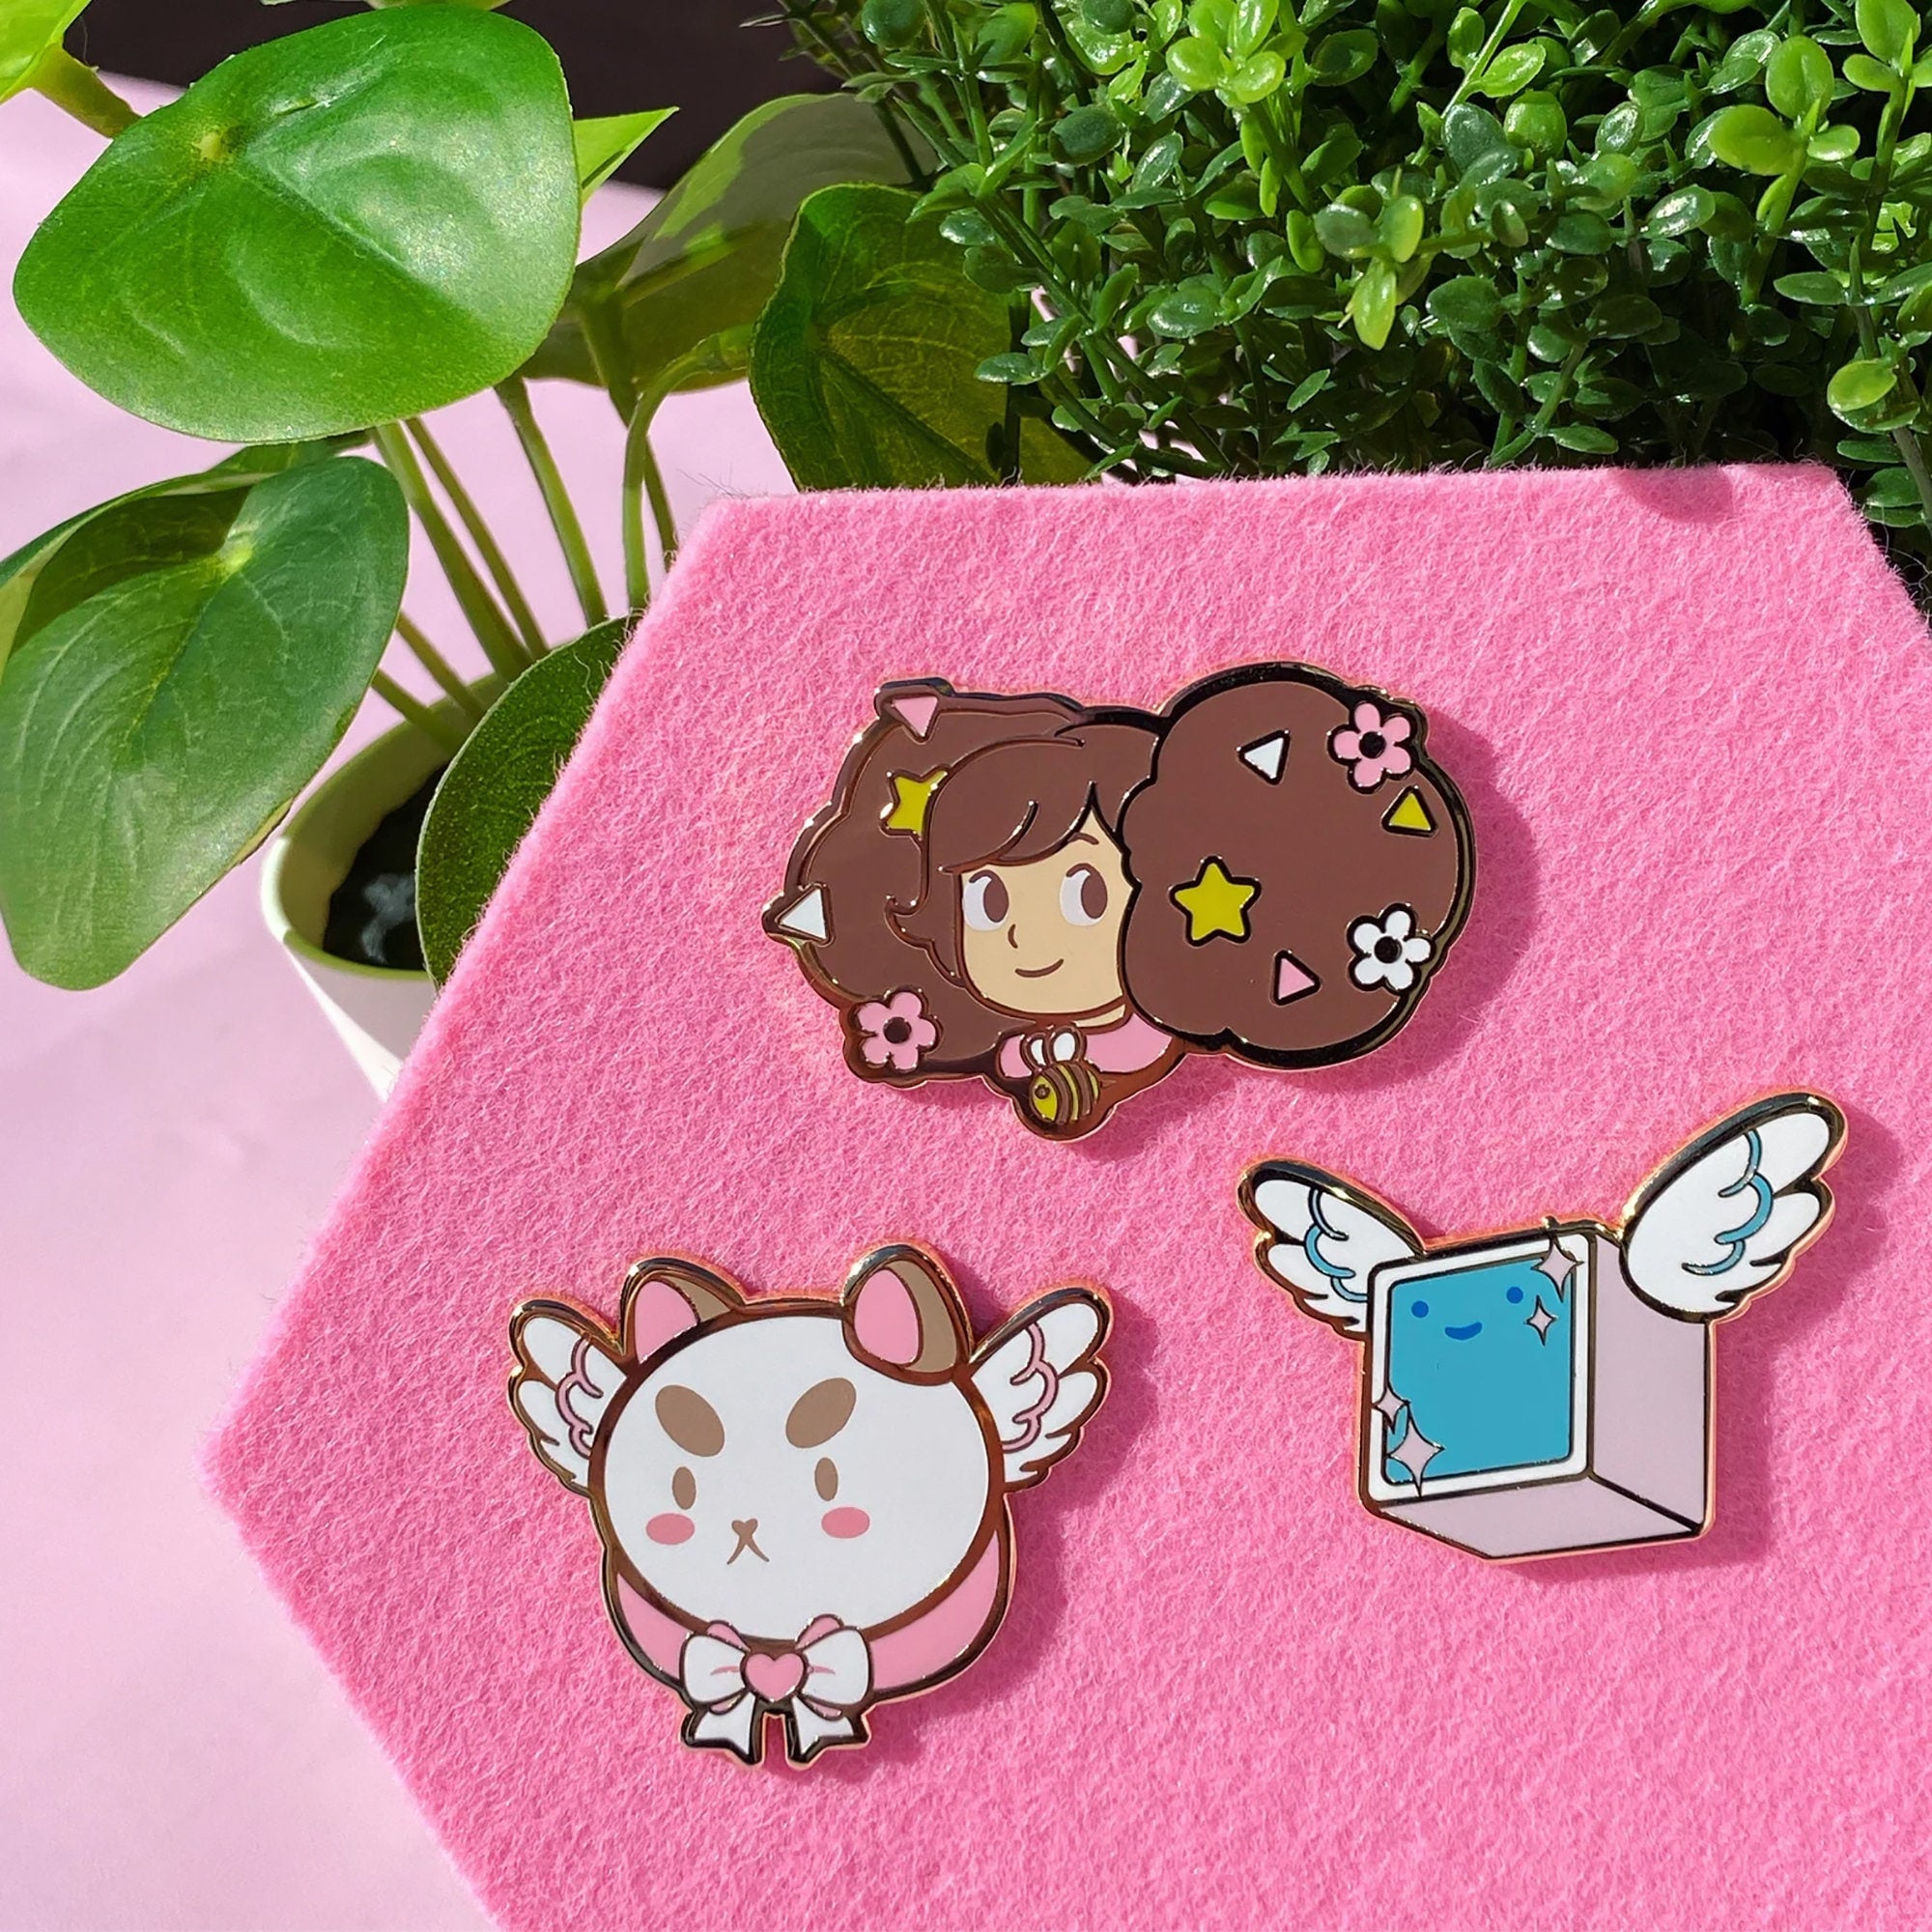 Cute TEMPBOT from Bee and Puppycat Hard Enamel Gold cast Lapel Pin Locking Clutch with FREE STICKER Kawaii Cartoon Fanart by Dokino